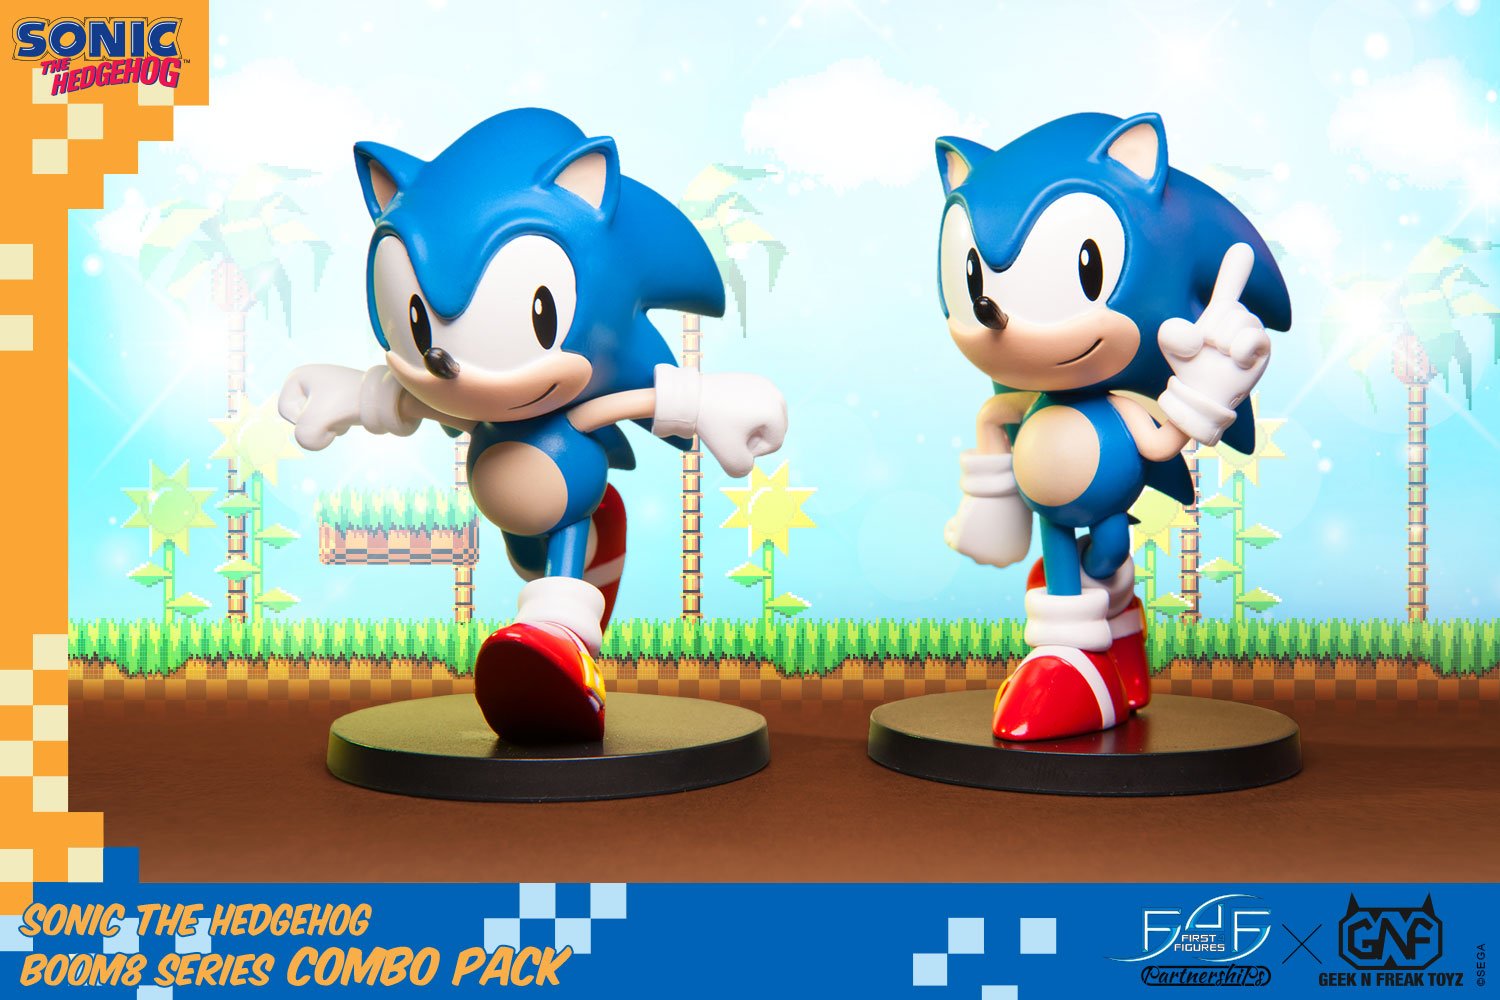 Sonic the Hedgehog on Twitter: 1500 x 1000